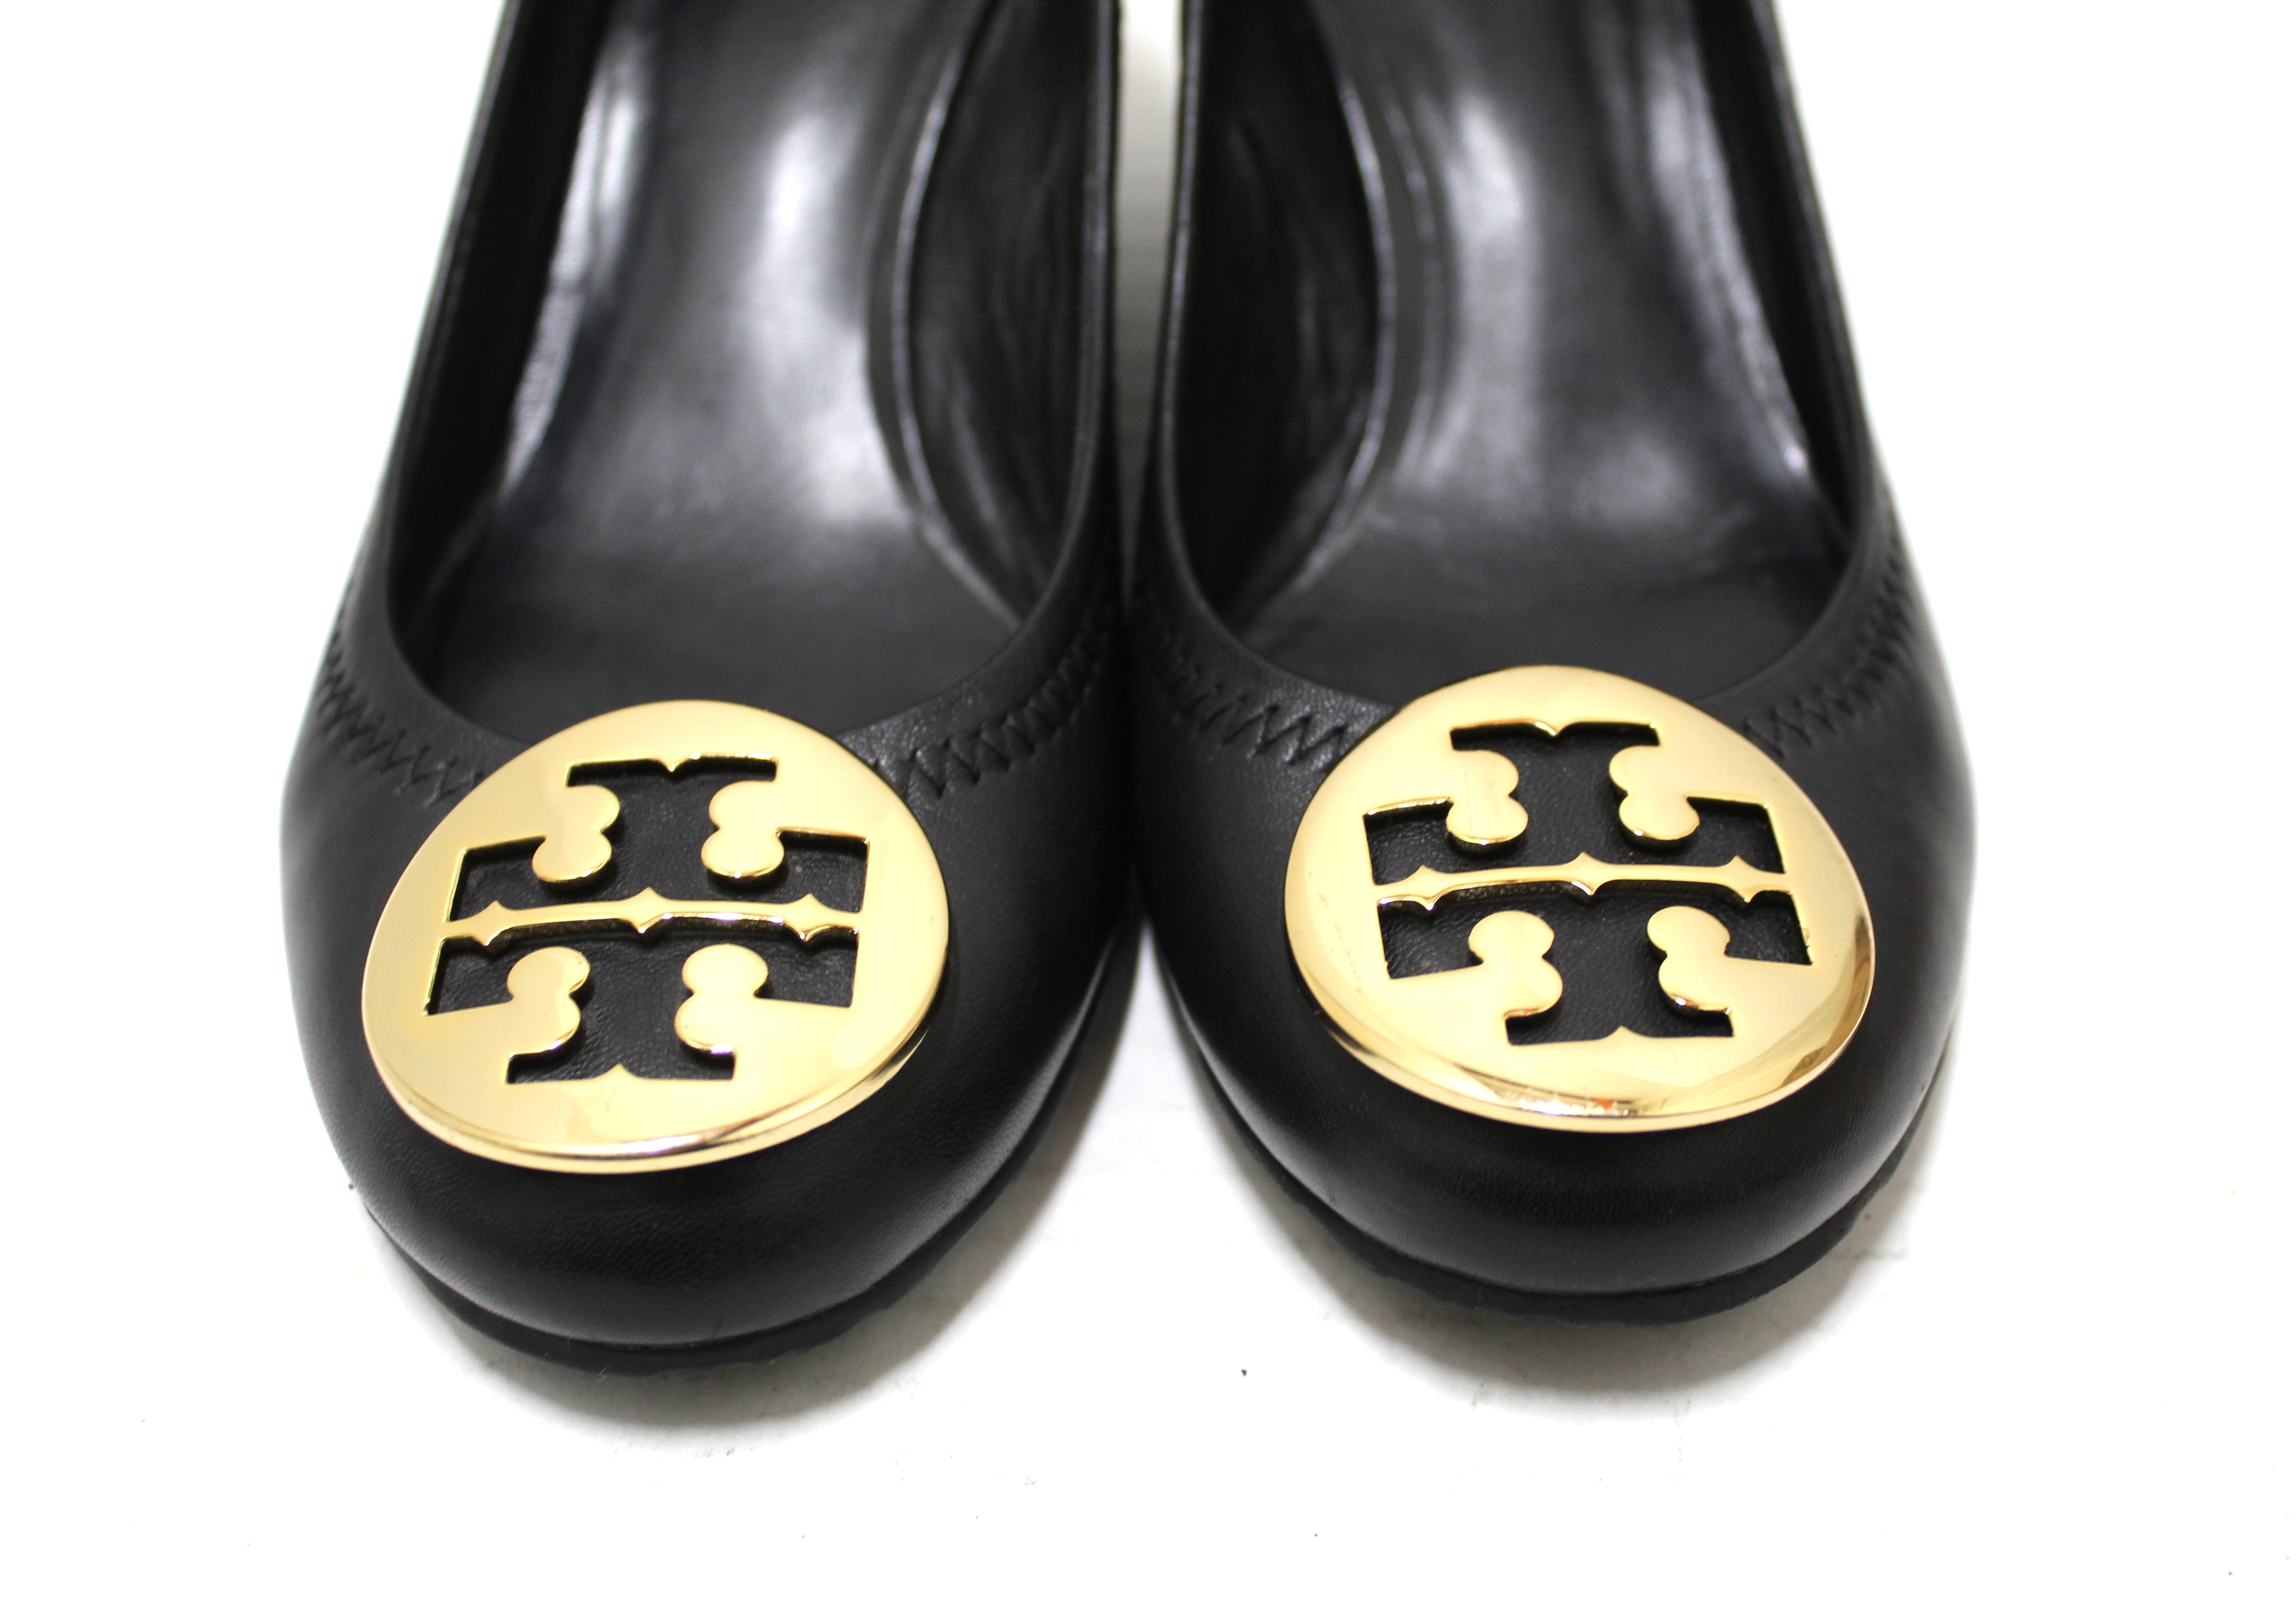 Authentic Tory Burch Black Leather Sally Wedge Size 6